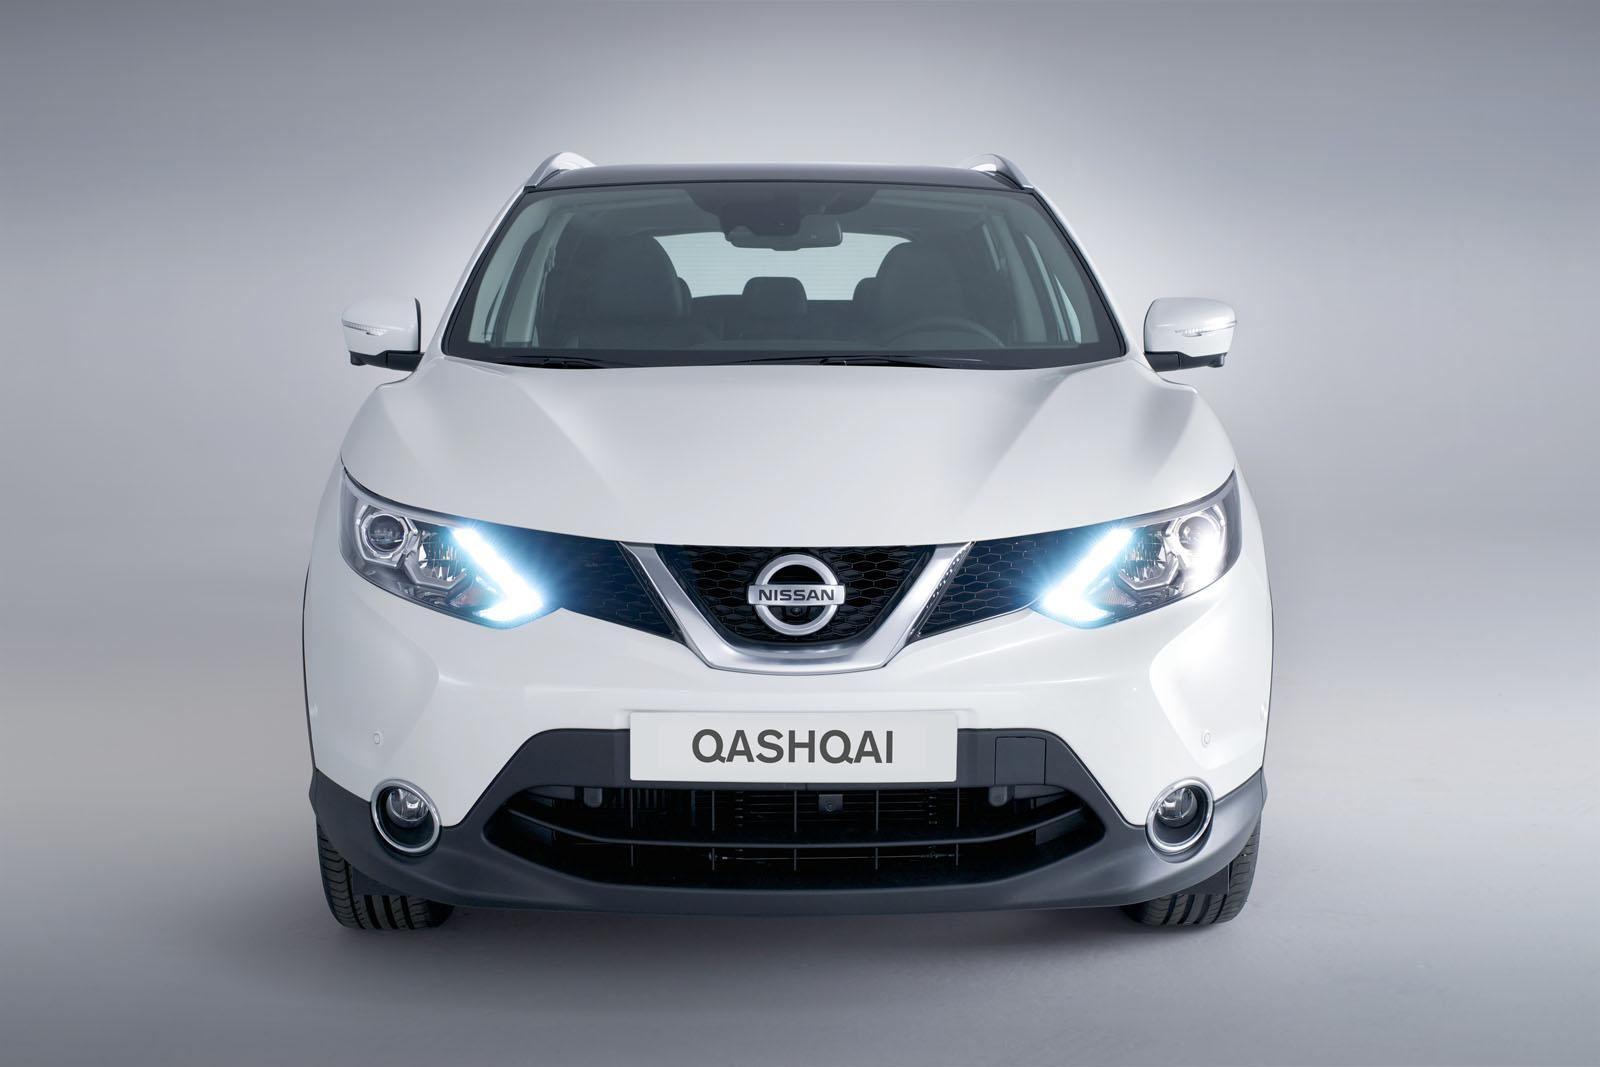 Nissan Qashqai 2014 photo 105773 picture at high resolution